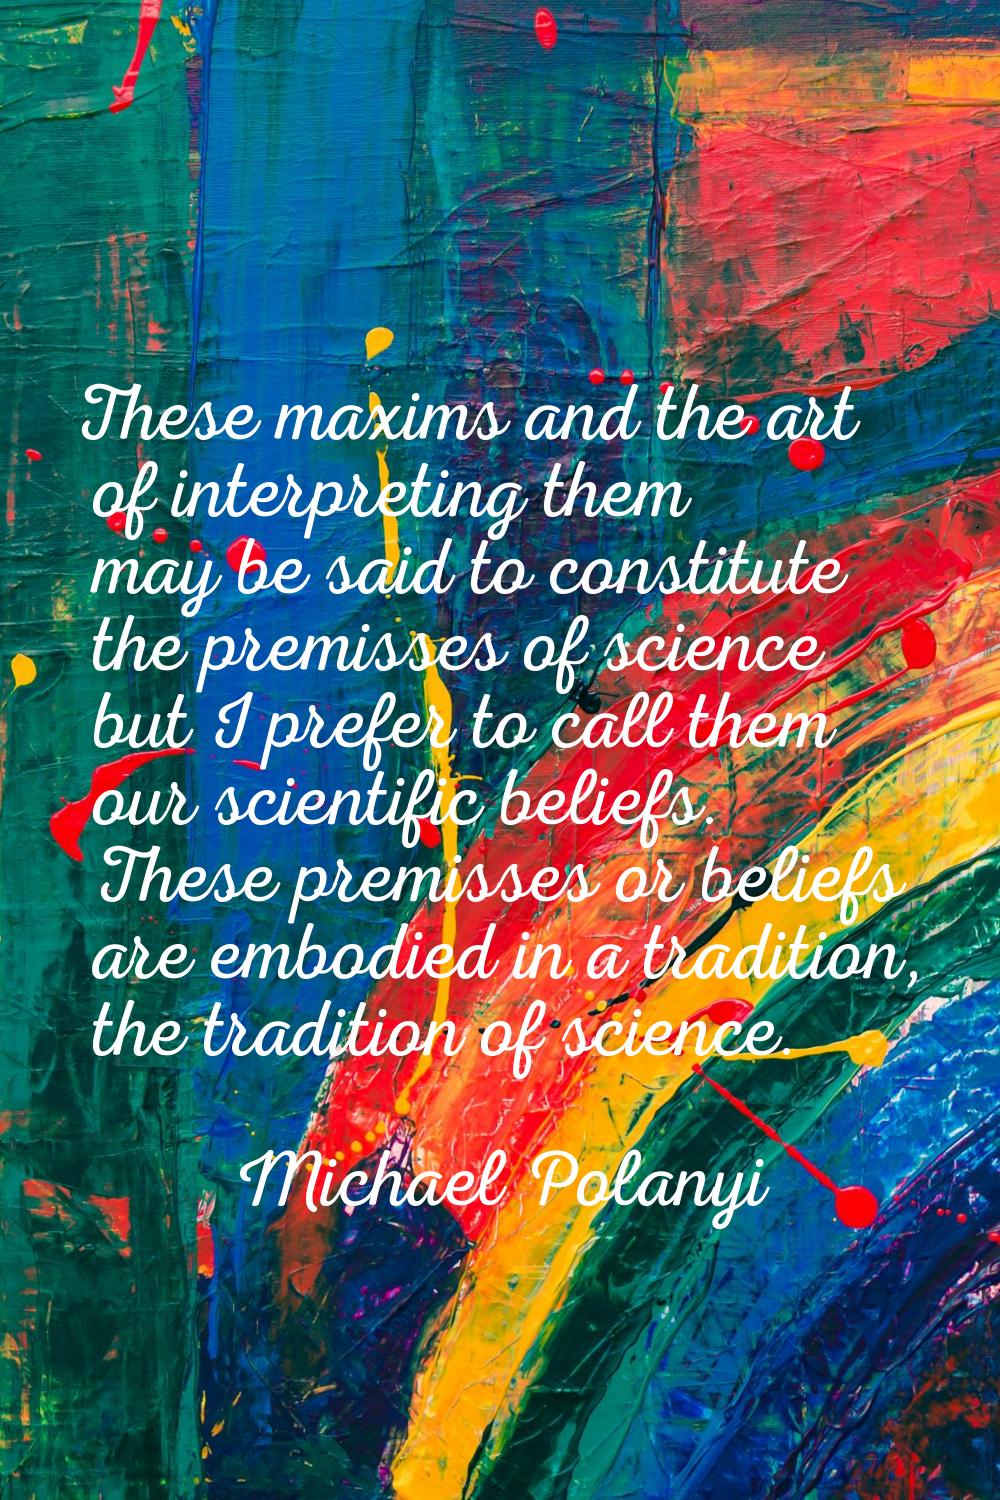 These maxims and the art of interpreting them may be said to constitute the premisses of science bu